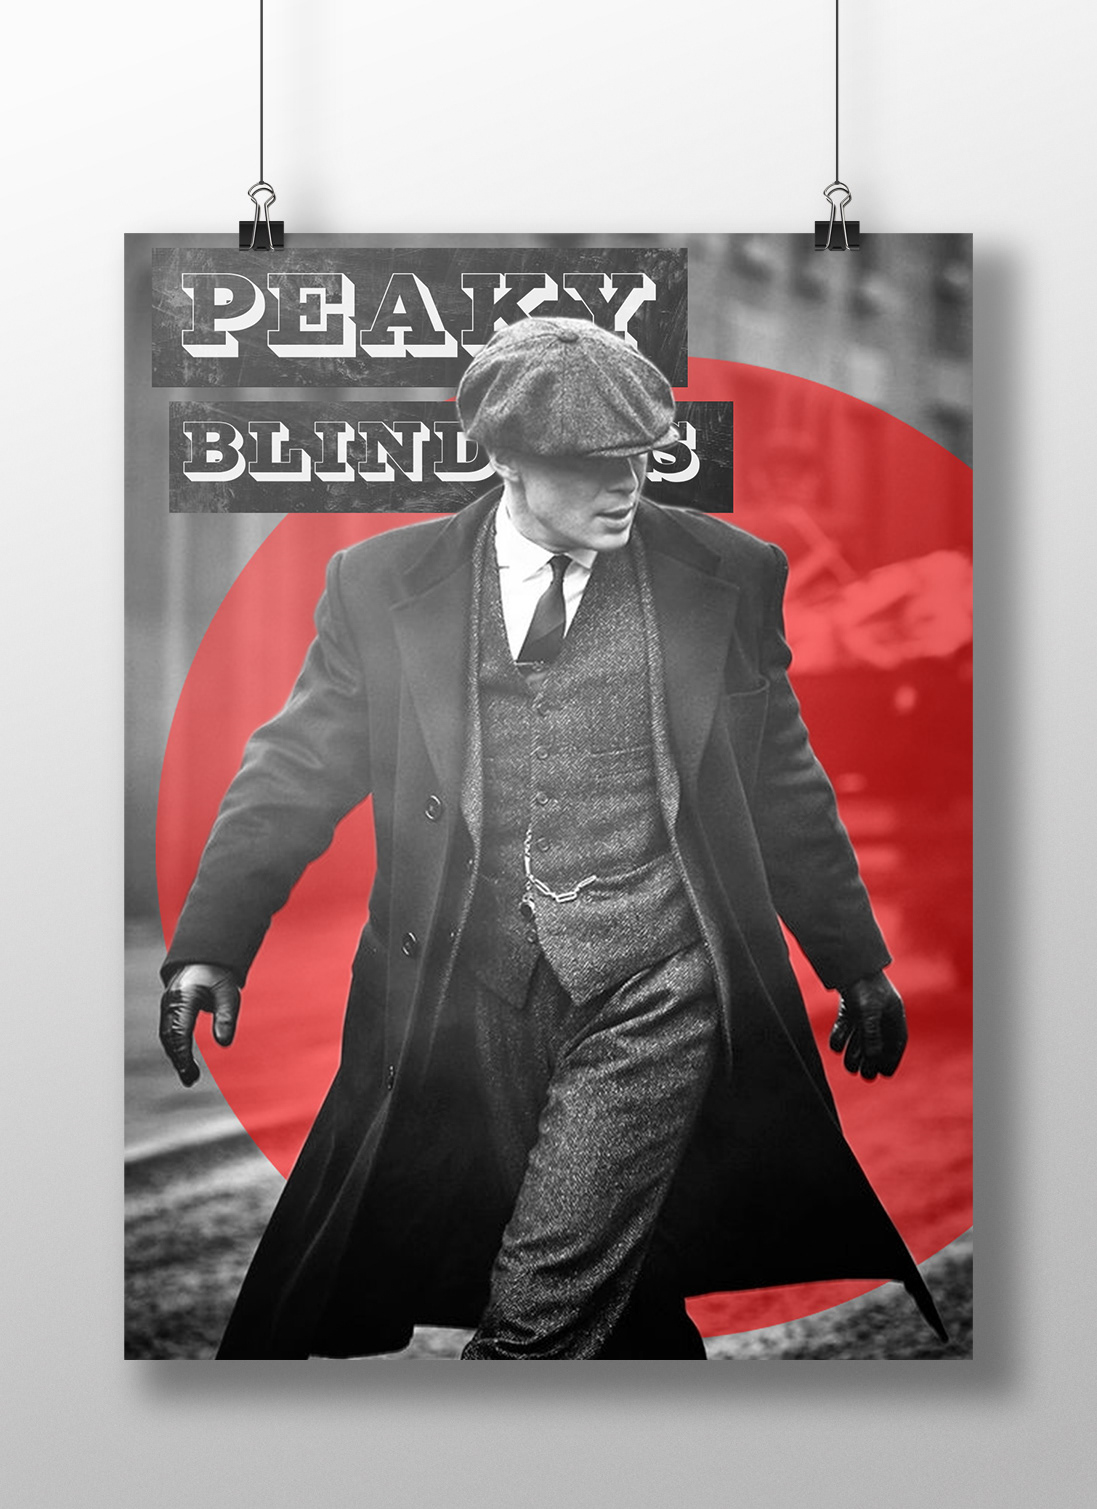 Peaky Blinders Wallpaper For Smartphone And Pc - Peaky Blinders Thomas Shelby Walking , HD Wallpaper & Backgrounds